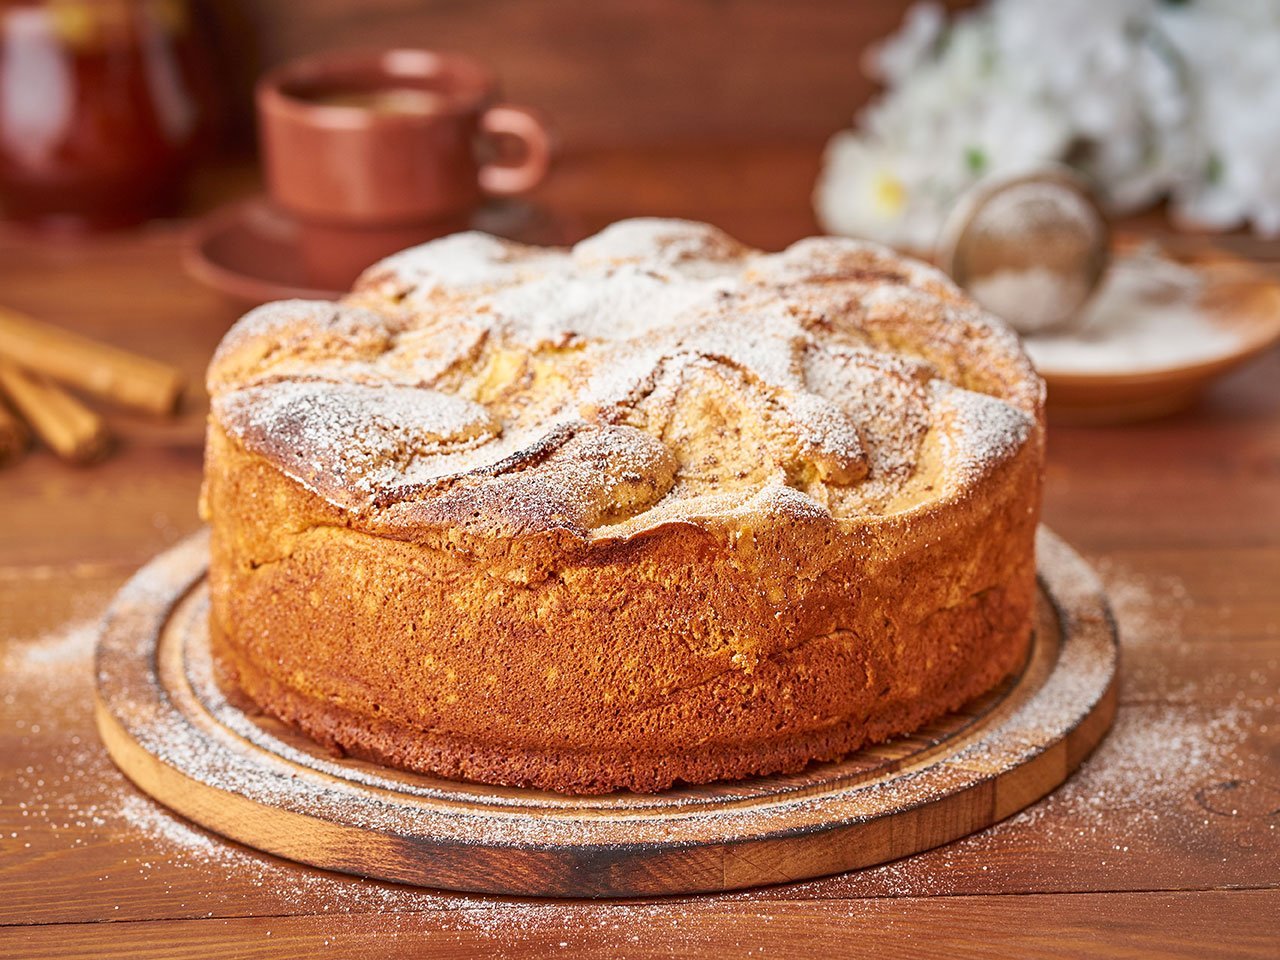 Apple French Cake With Apples, Cinnamon On Dark Wooden Kitchen Table, Side View